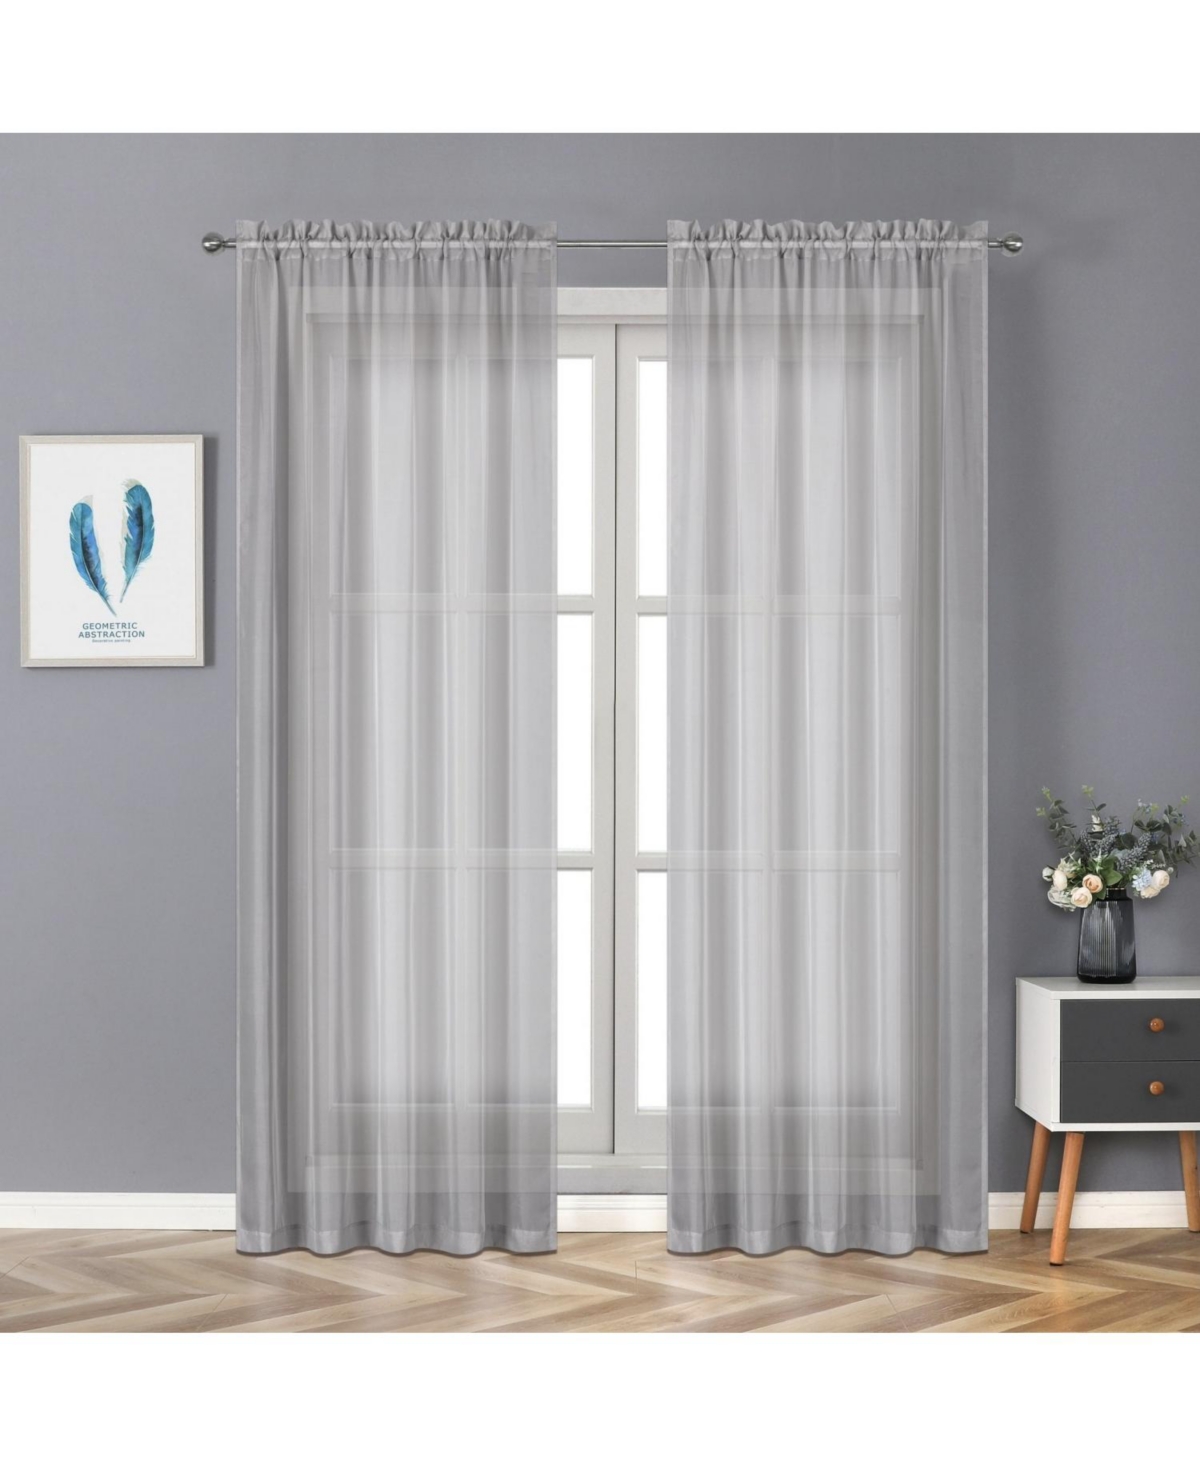 Montauk Accents Ultra Lux 2 Piece Rod Pocket Silver Sheer Voile Window Curtain Panels - 84 in. Long - Silver